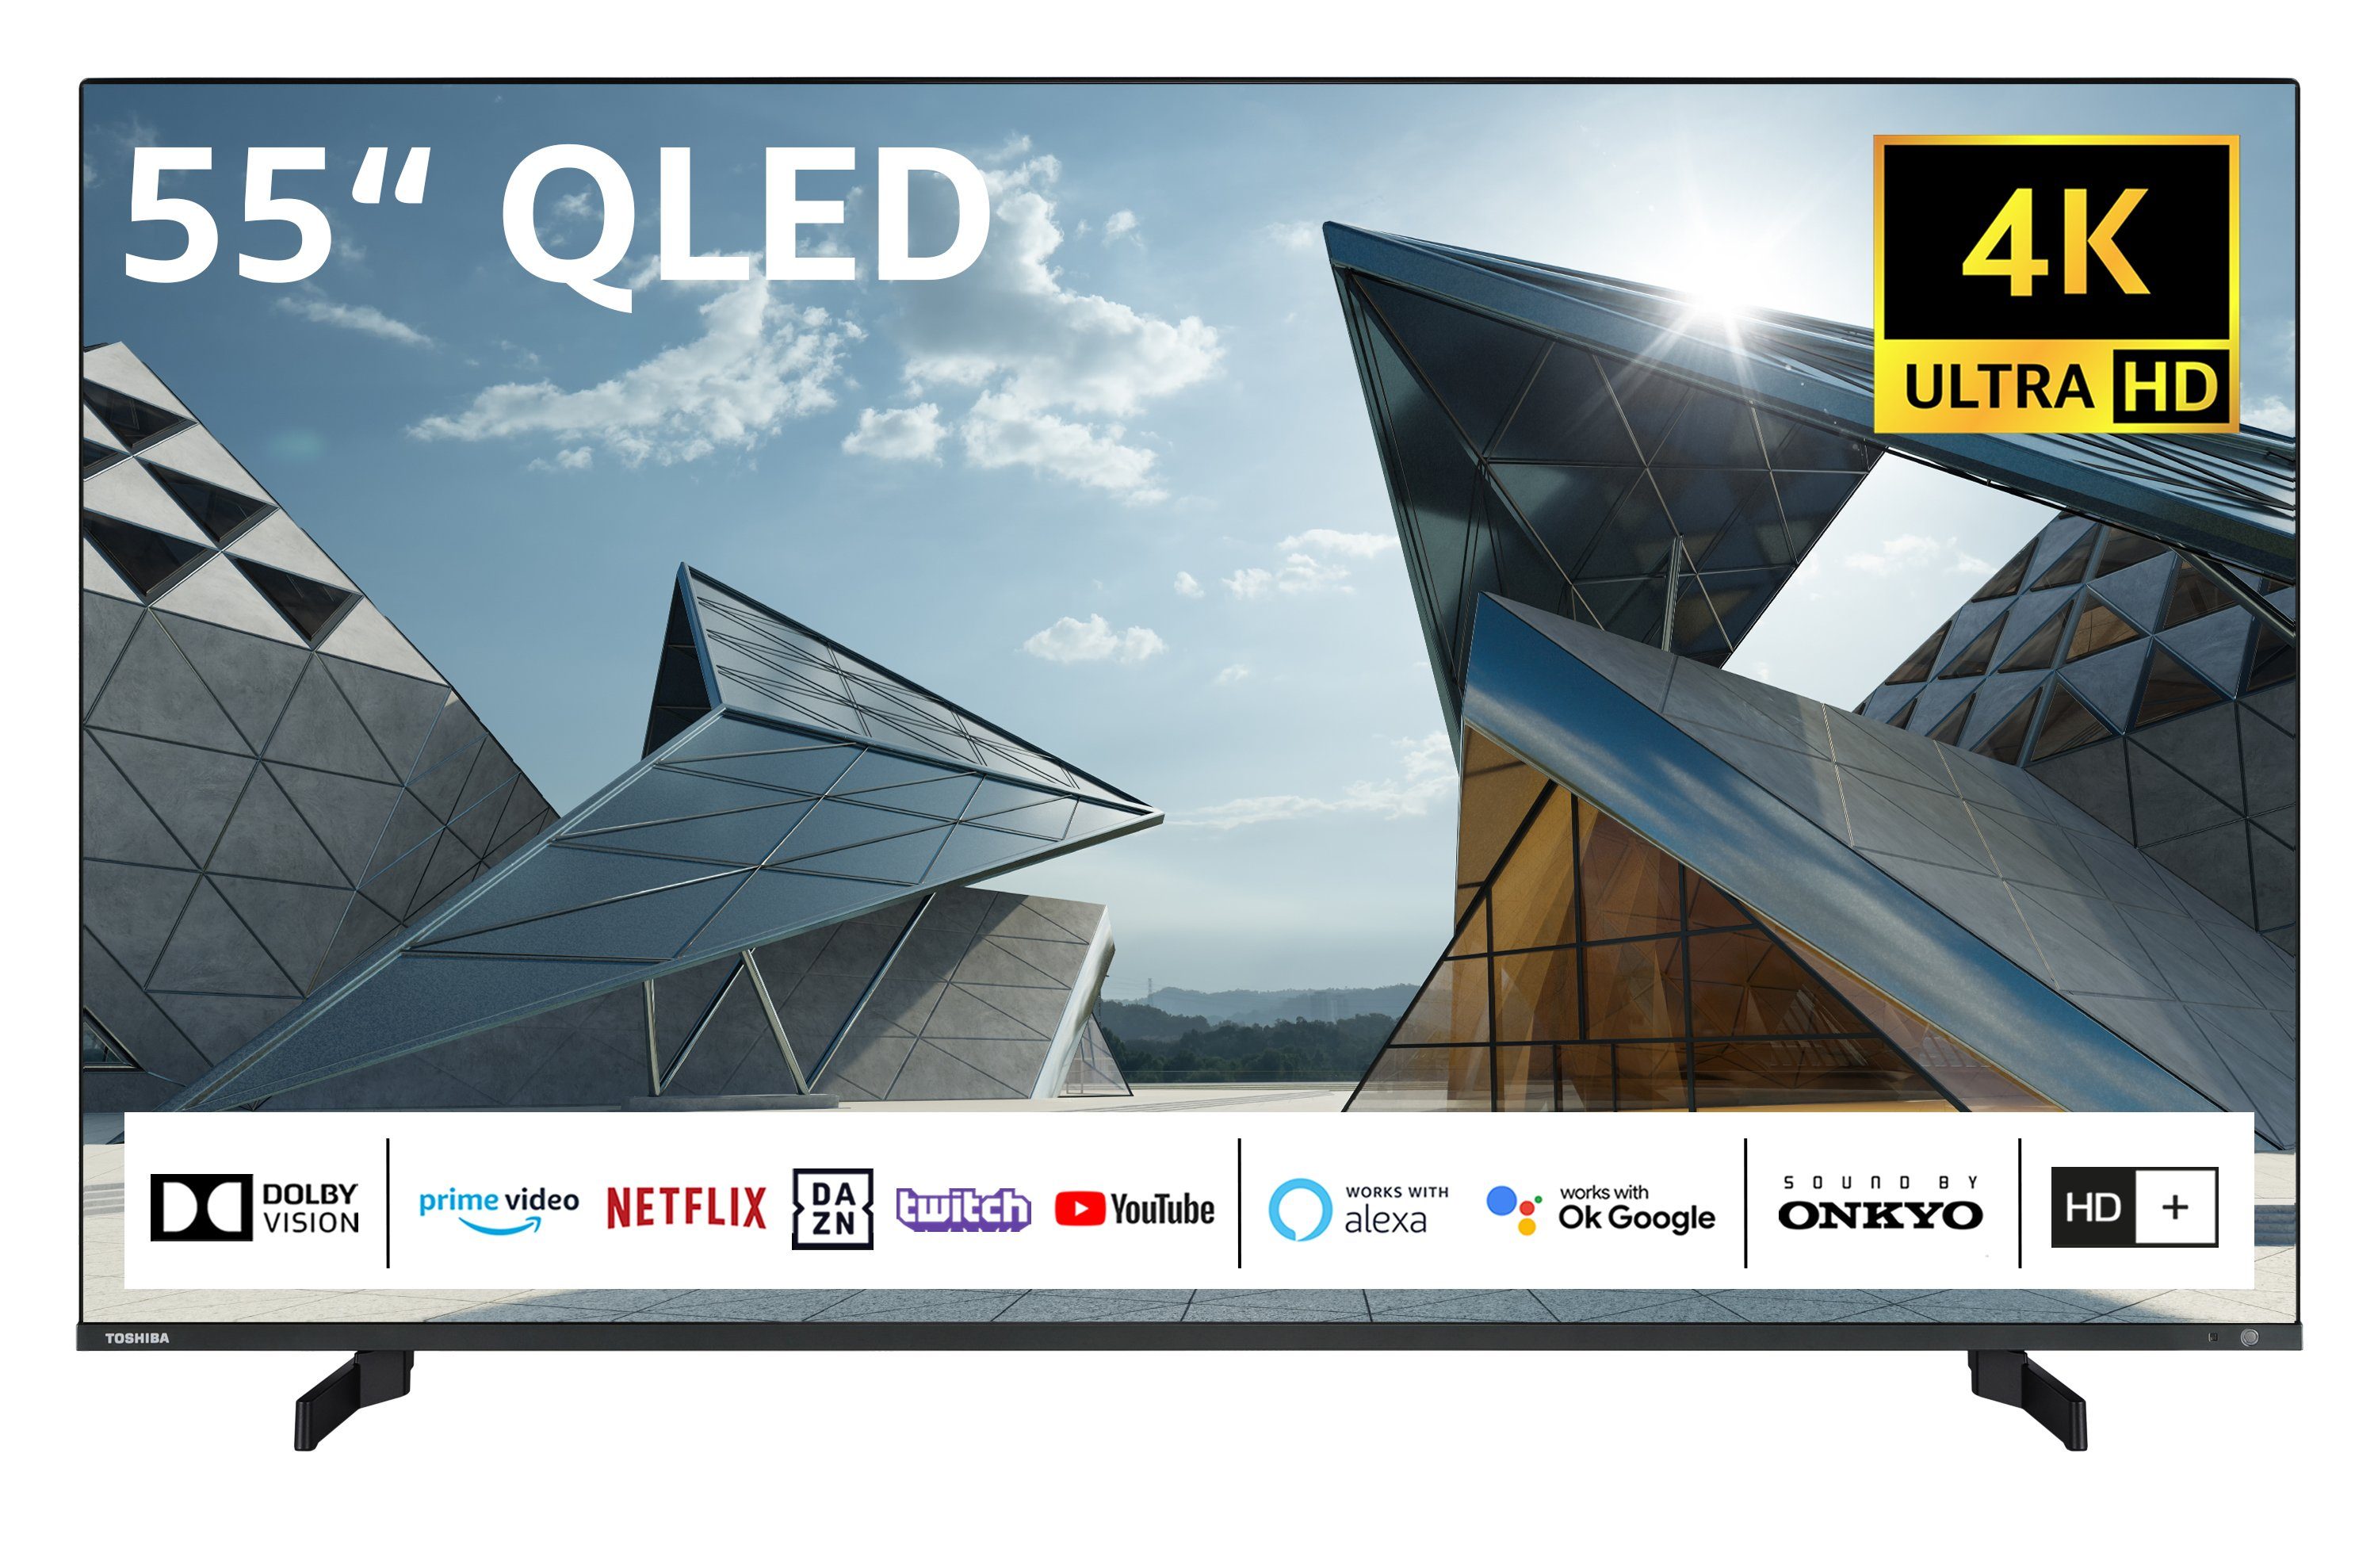 Toshiba 55QL5D63DAY QLED-Fernseher (139 cm/55 Zoll, 4K Ultra HD, Smart TV, HDR Dolby Vision, Triple-Tuner, Sound by Onkyo - Inkl. 6 Monate HD) | alle Fernseher